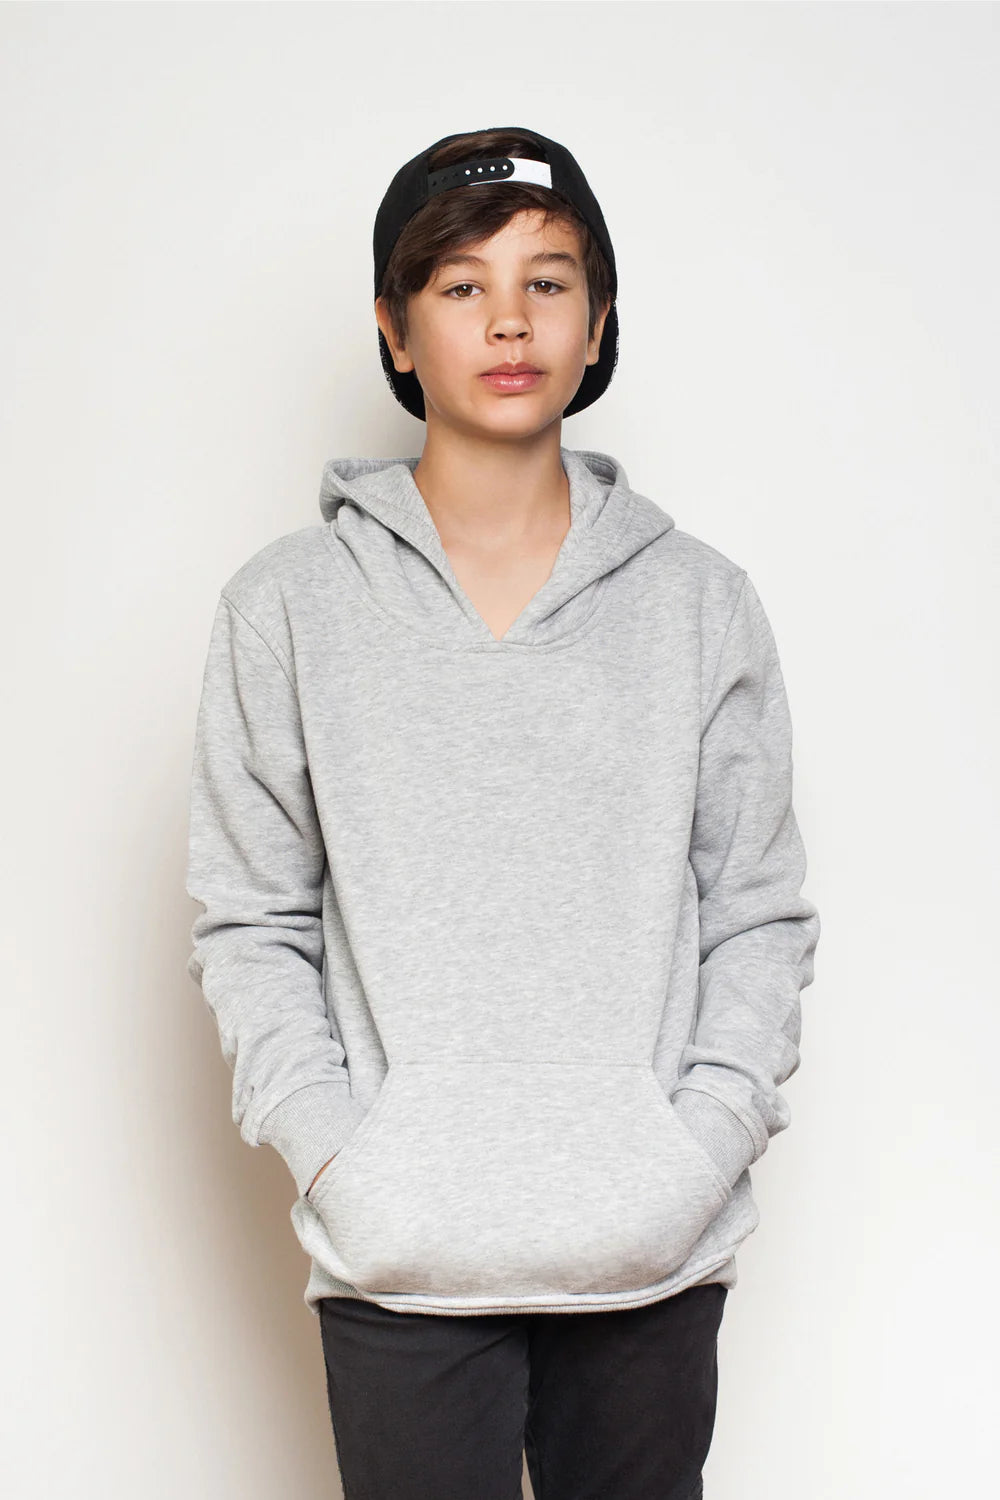 Premium YOUTH Unisex Hoodie- DESIGN YOUR OWN + Matching Sweat Pants